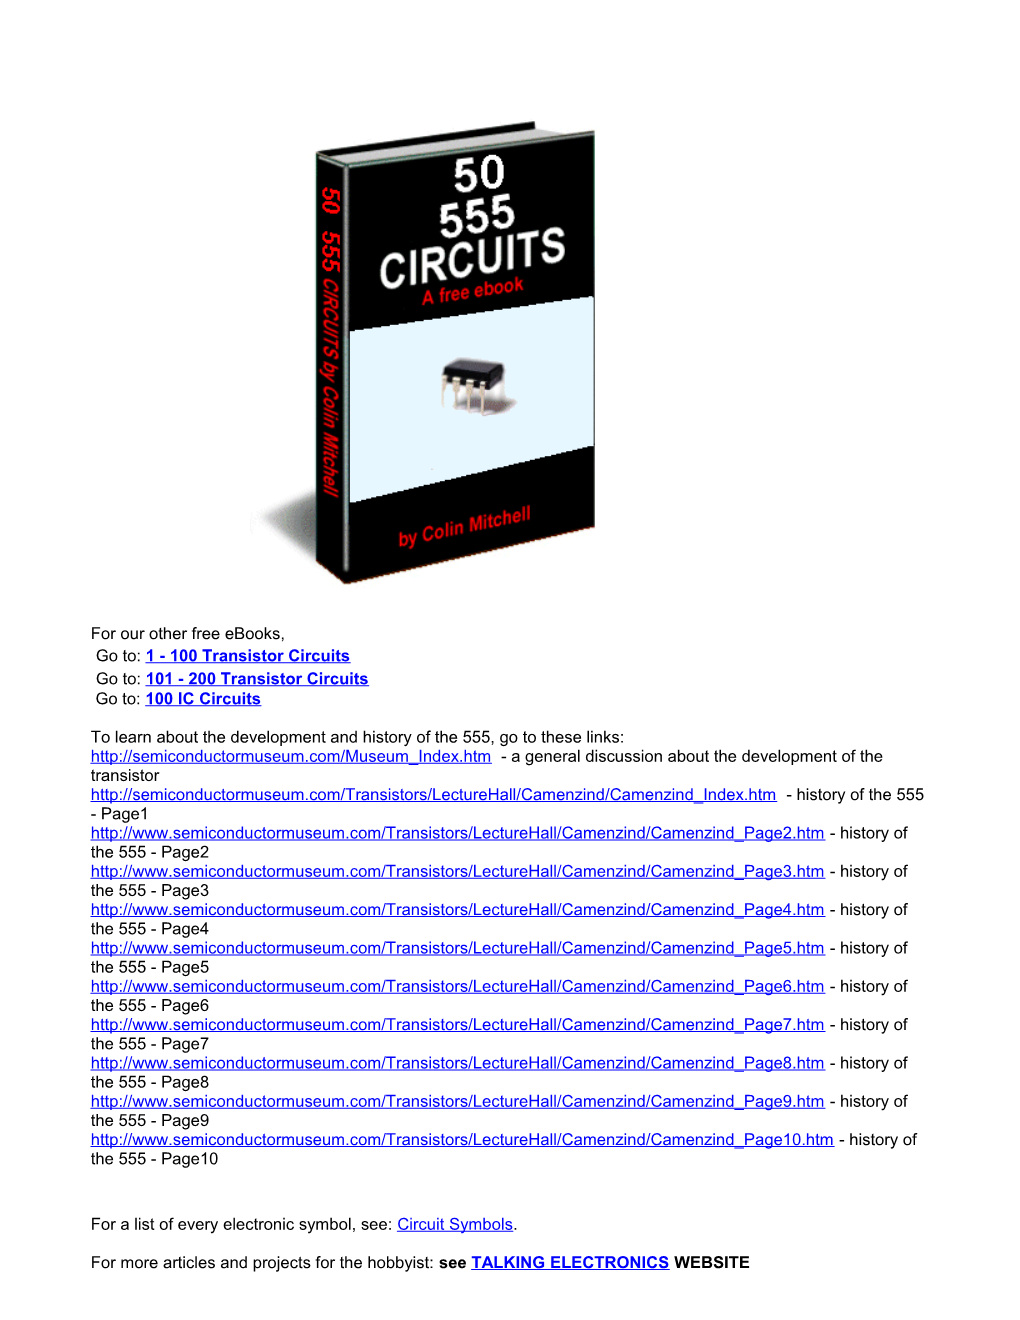 For Our Other Free Ebooks, Go To: 1 - 100 Transistor Circuits Go To: 101 - 200 Transistor